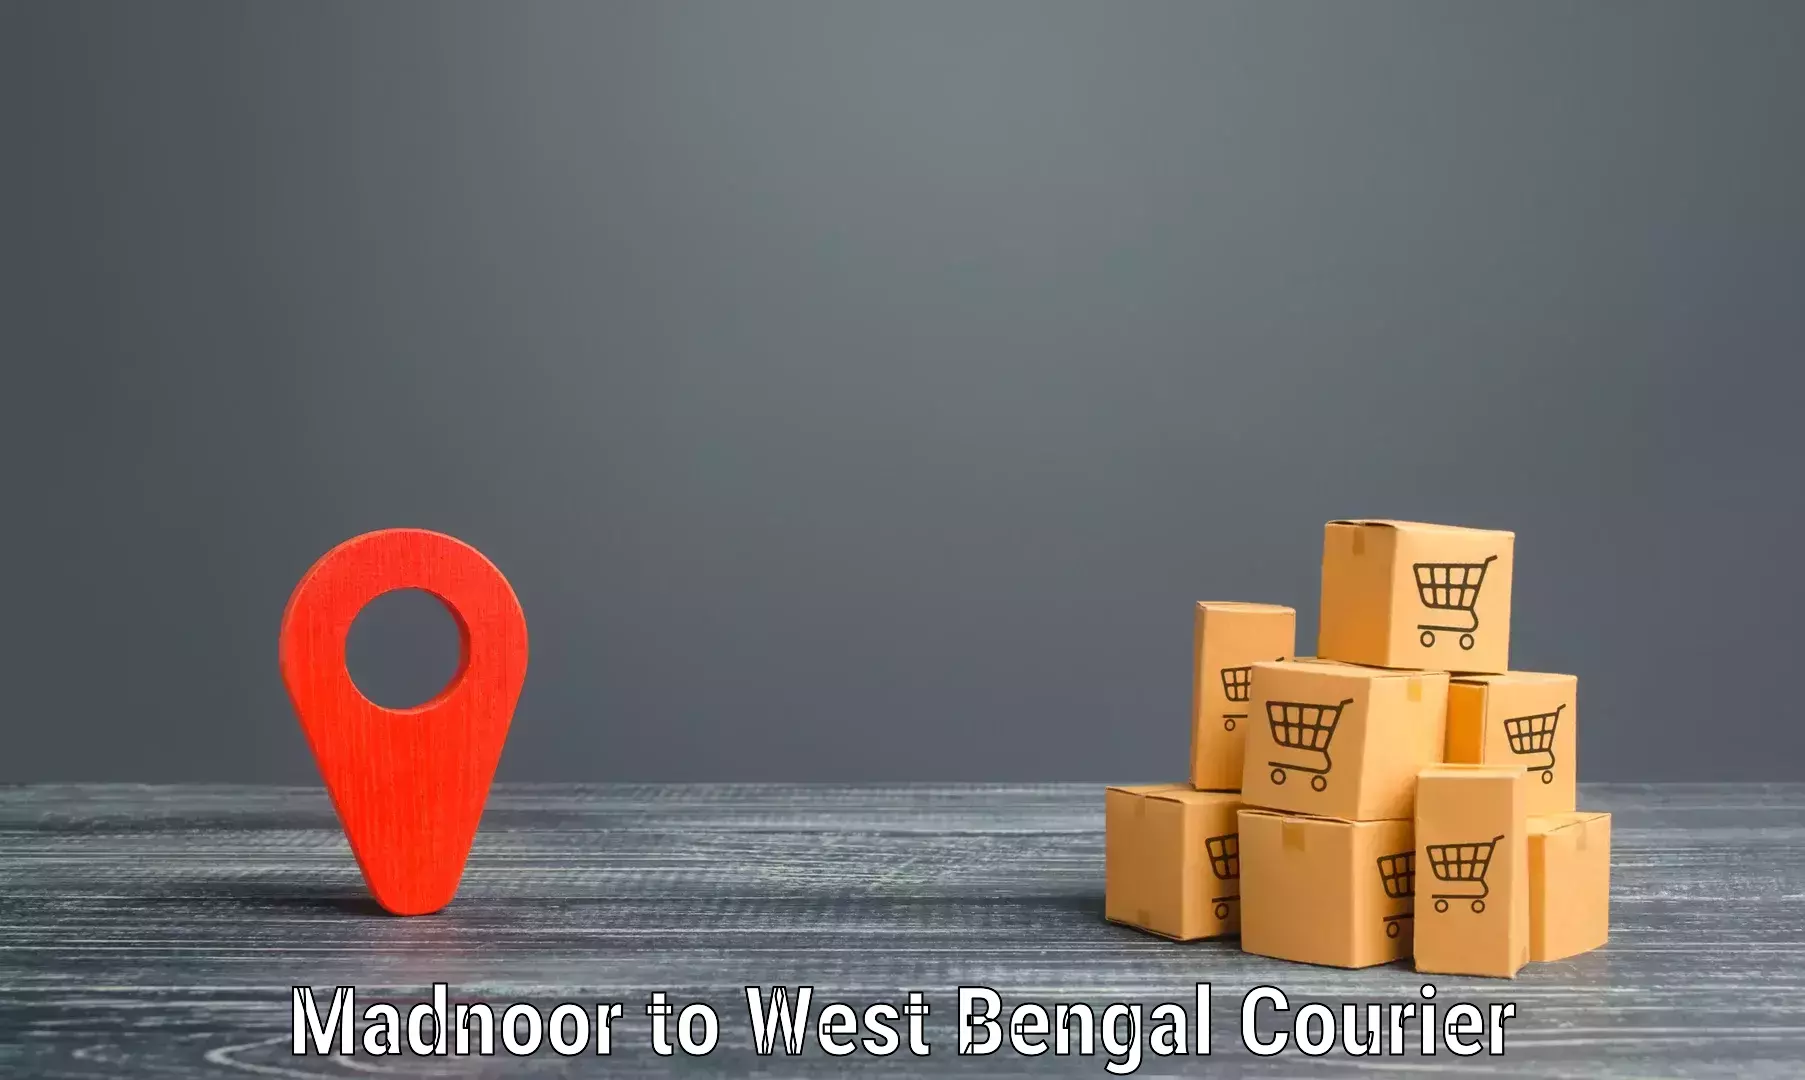 Courier services in Madnoor to Mejia